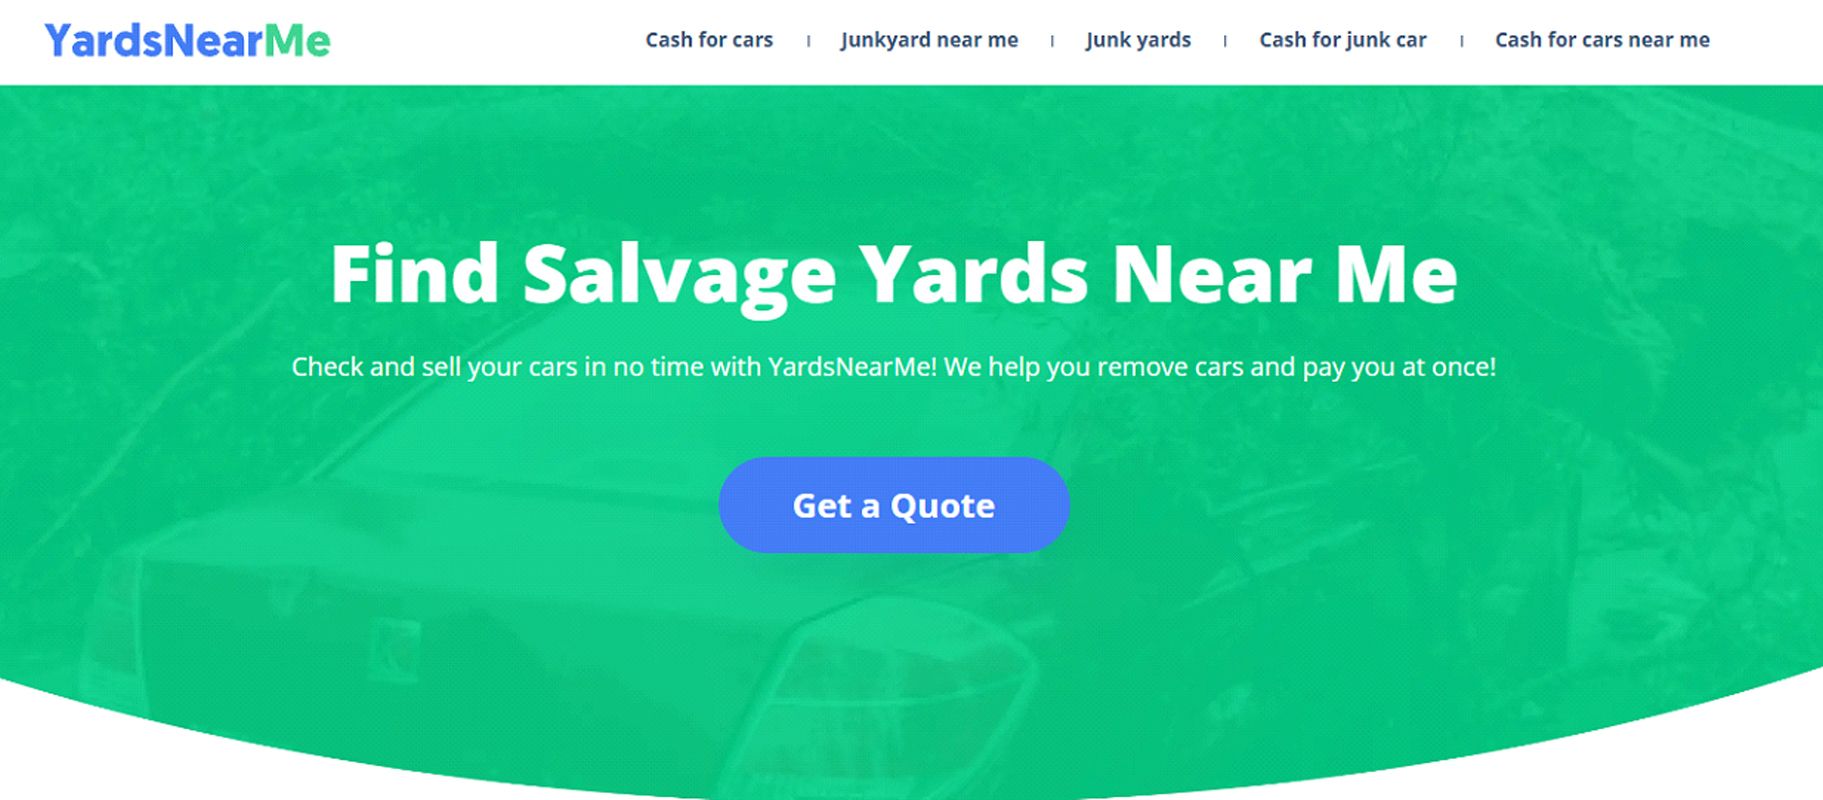 10 Best ways to get cash for cars near me photo 6